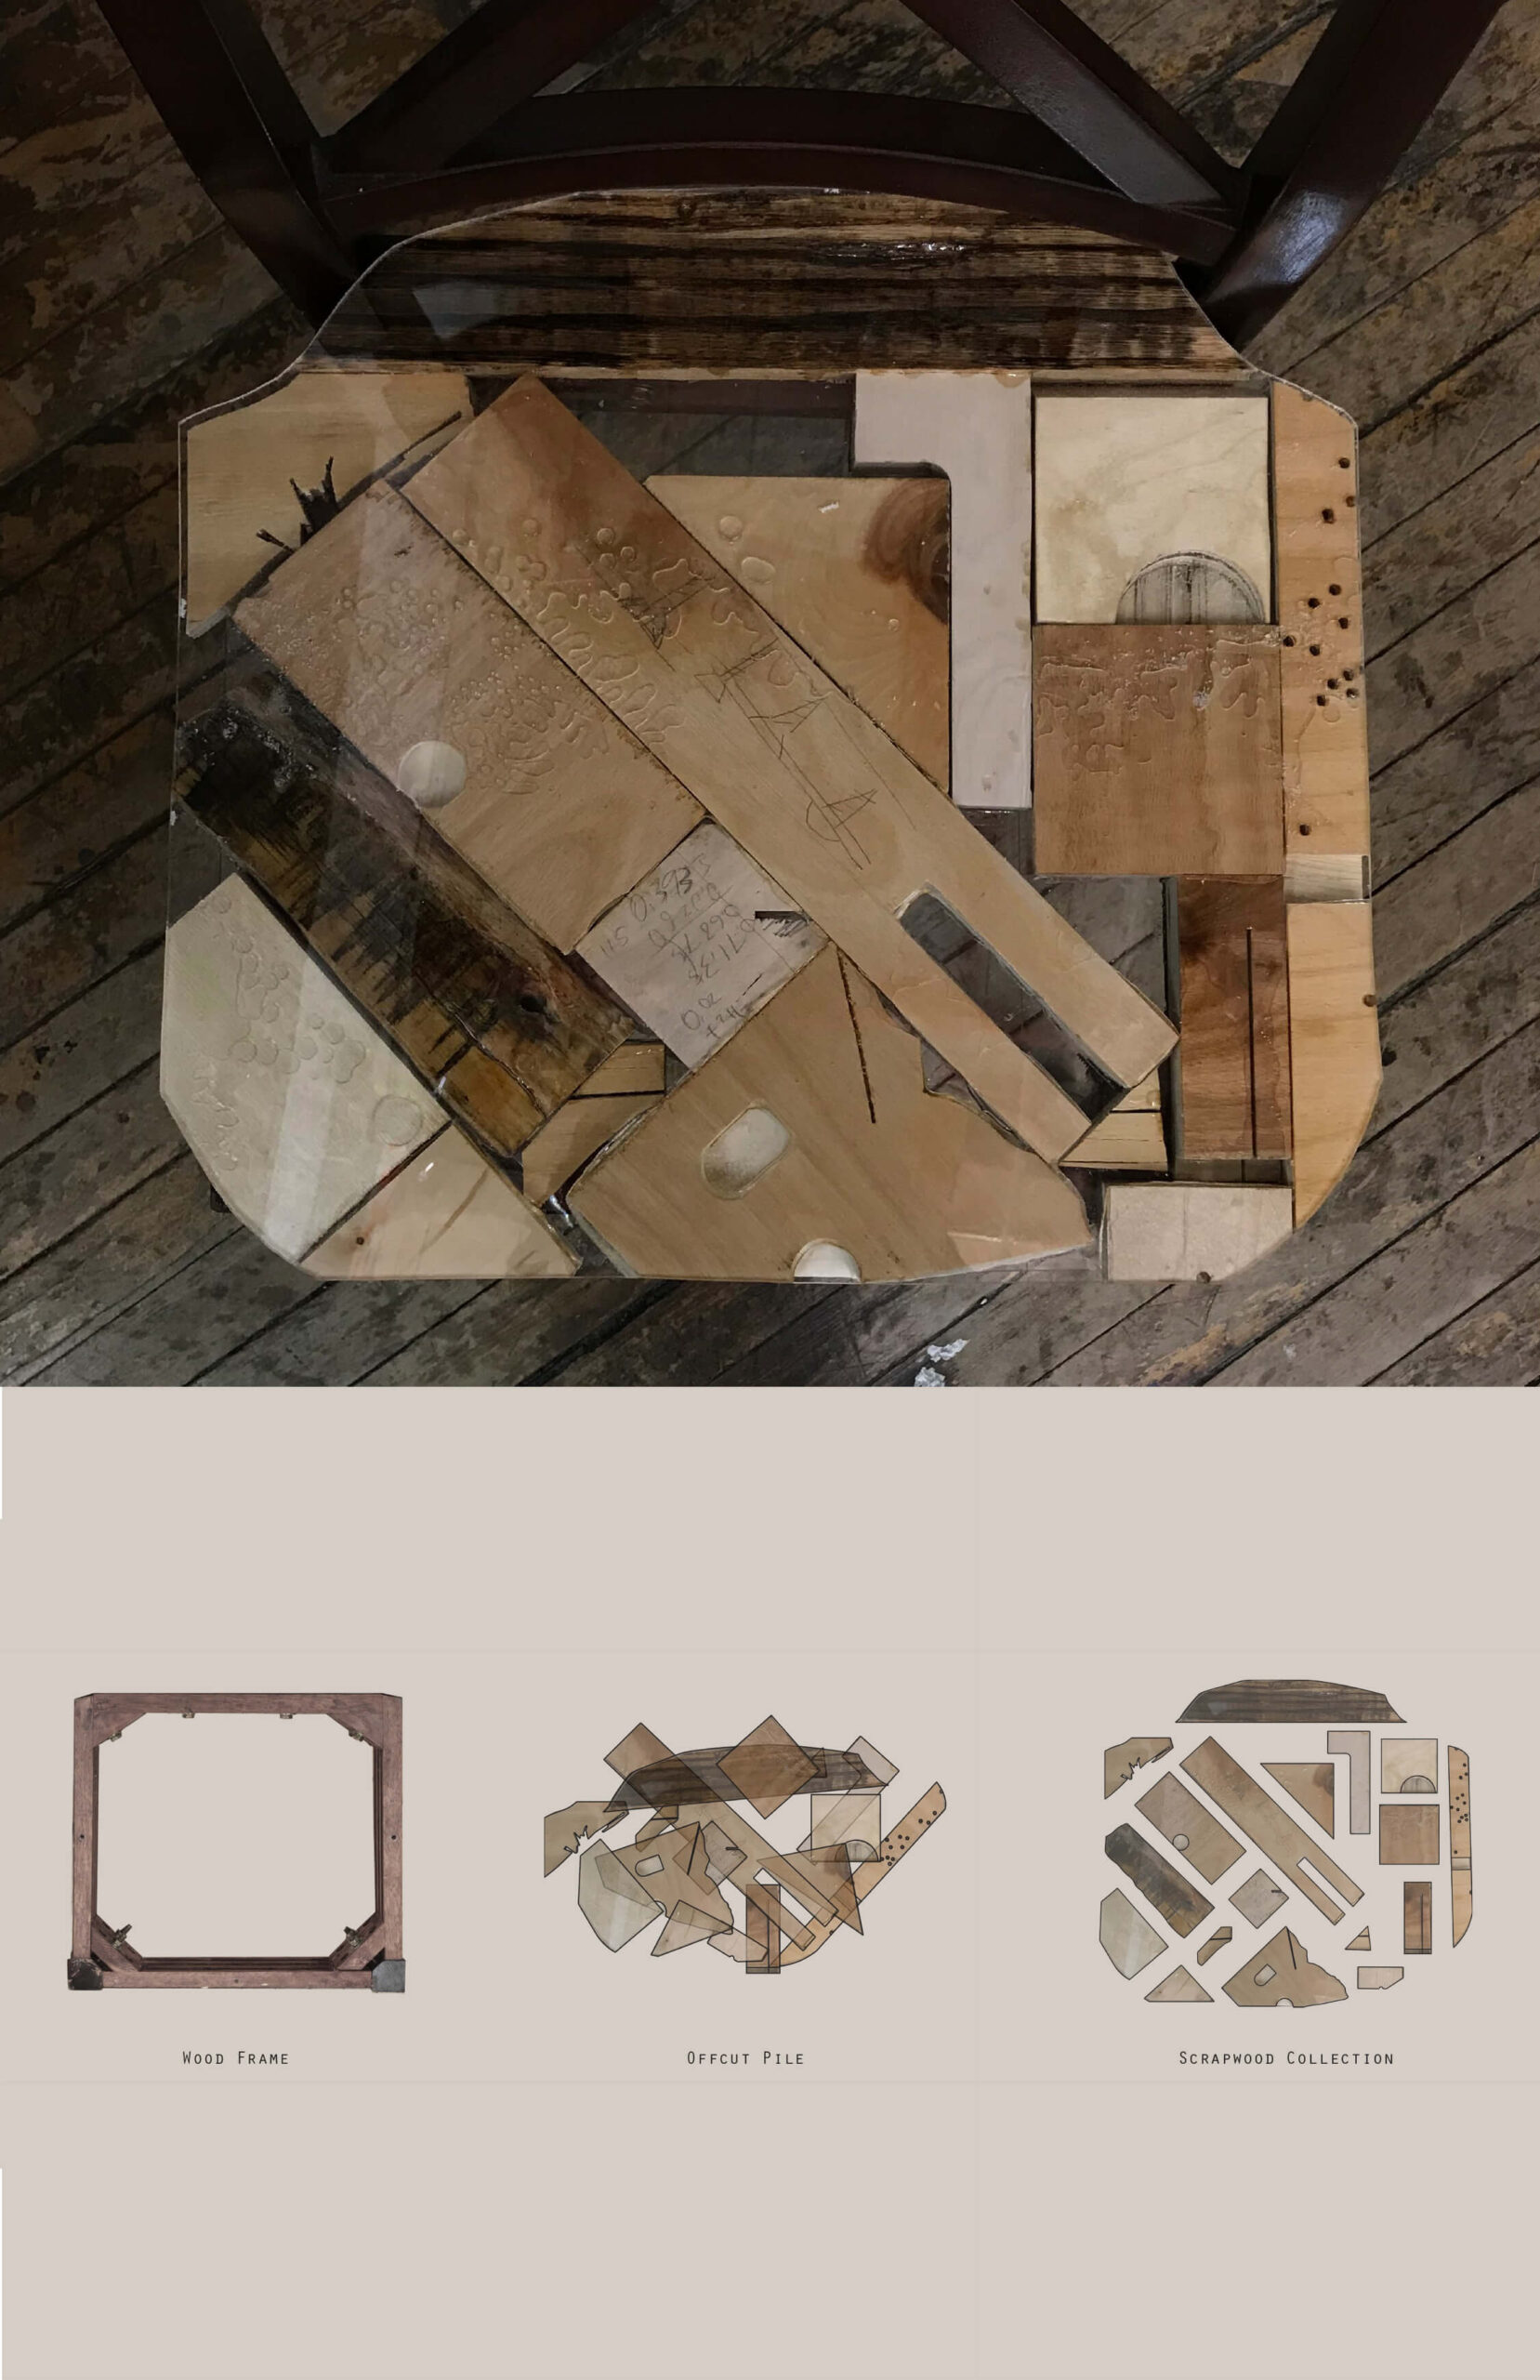 A photo edit with a schematic of a chair's seat shown directly below a picture of the finished chair. The chair consists of a various pieces of wood of different shapes, sizes and colors assembled like a jigsaw puzzle.